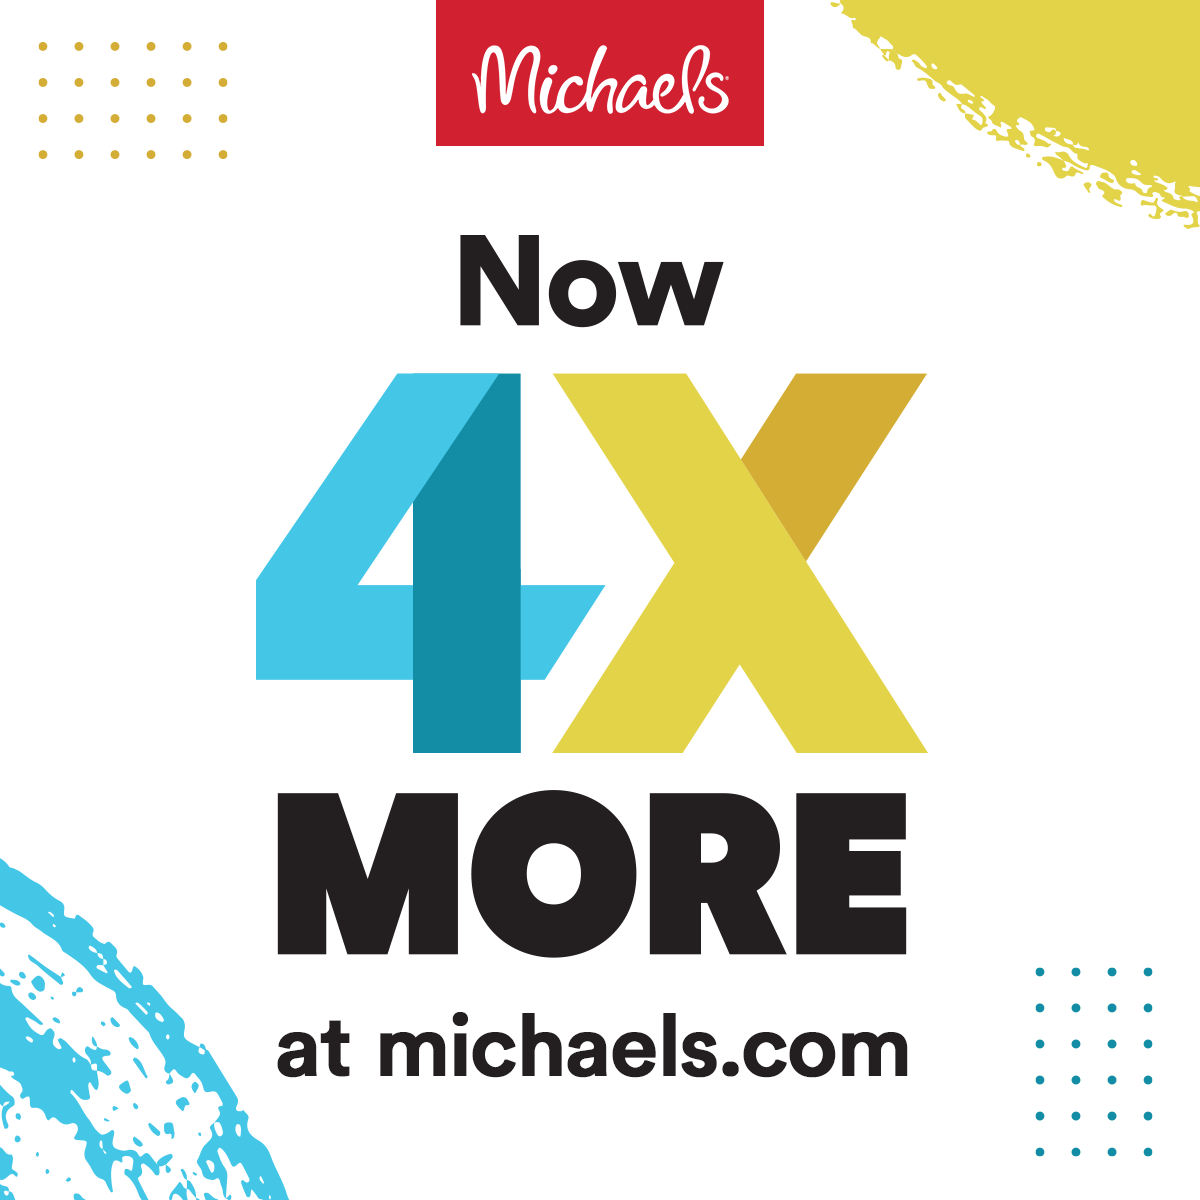 Michaels Expands Online Assortment with New Third-Party